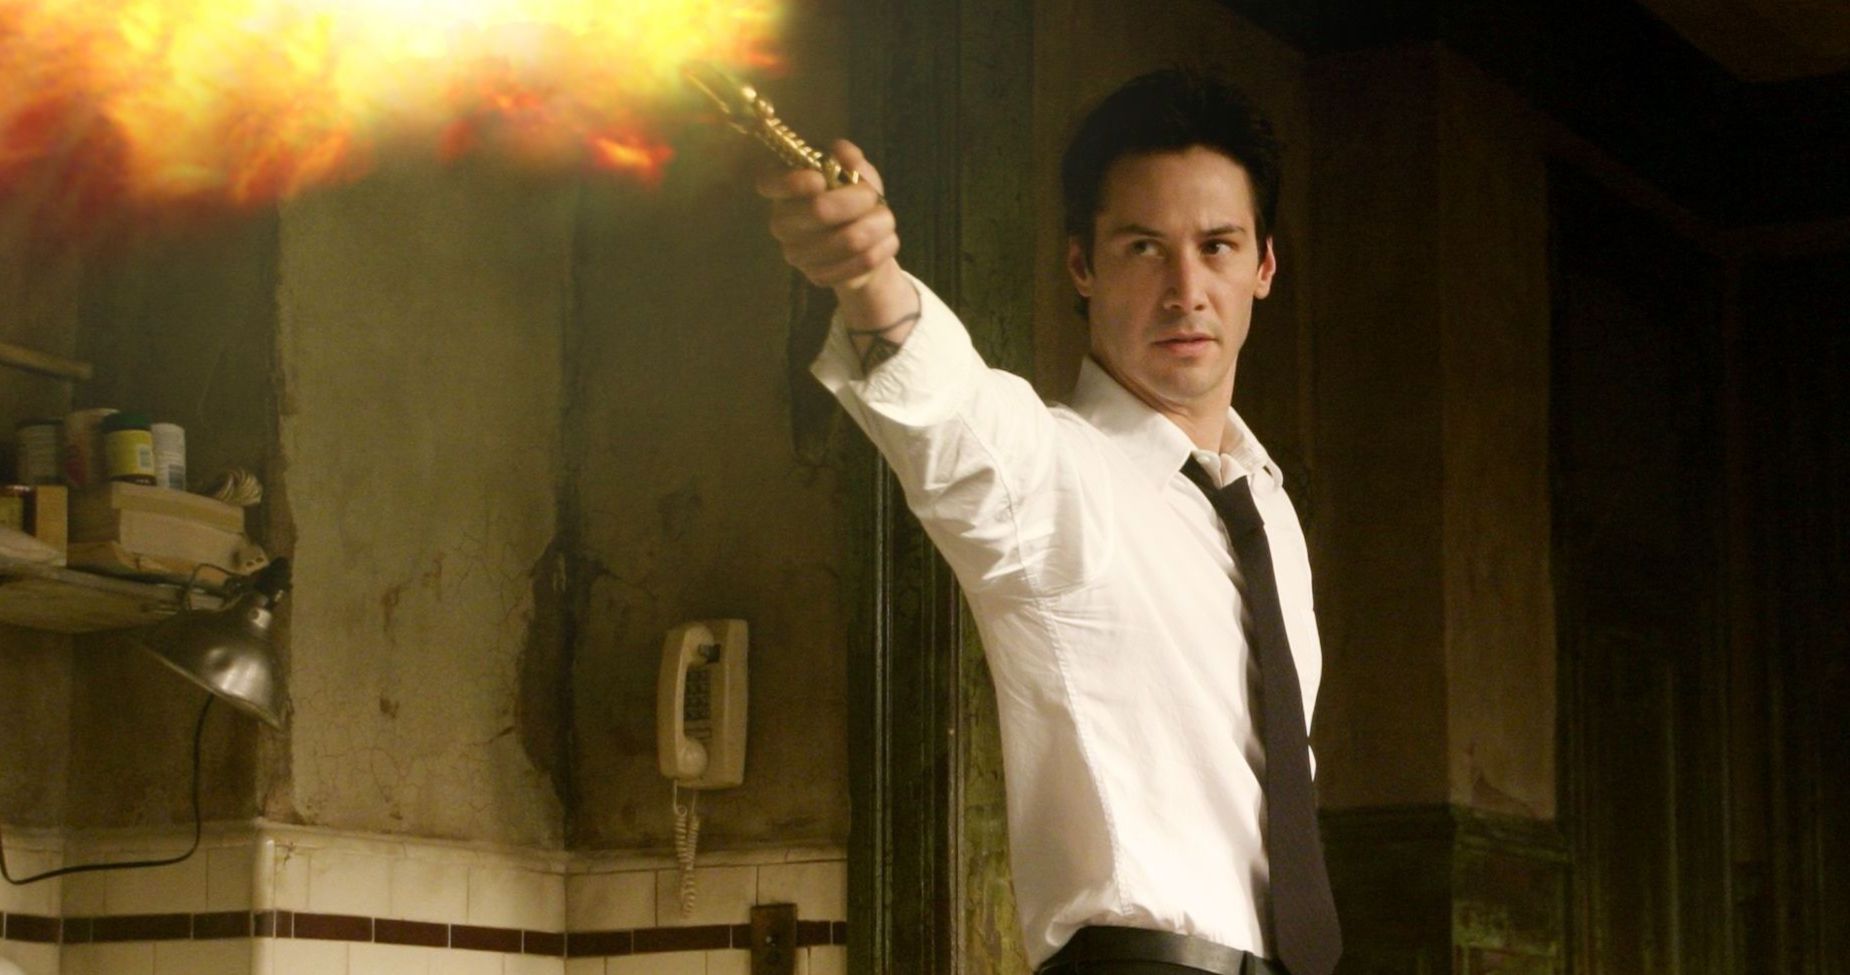 Will Constantine 2 Ever Happen? Producer Akiva Goldsman Gives an Update at Comic-Con